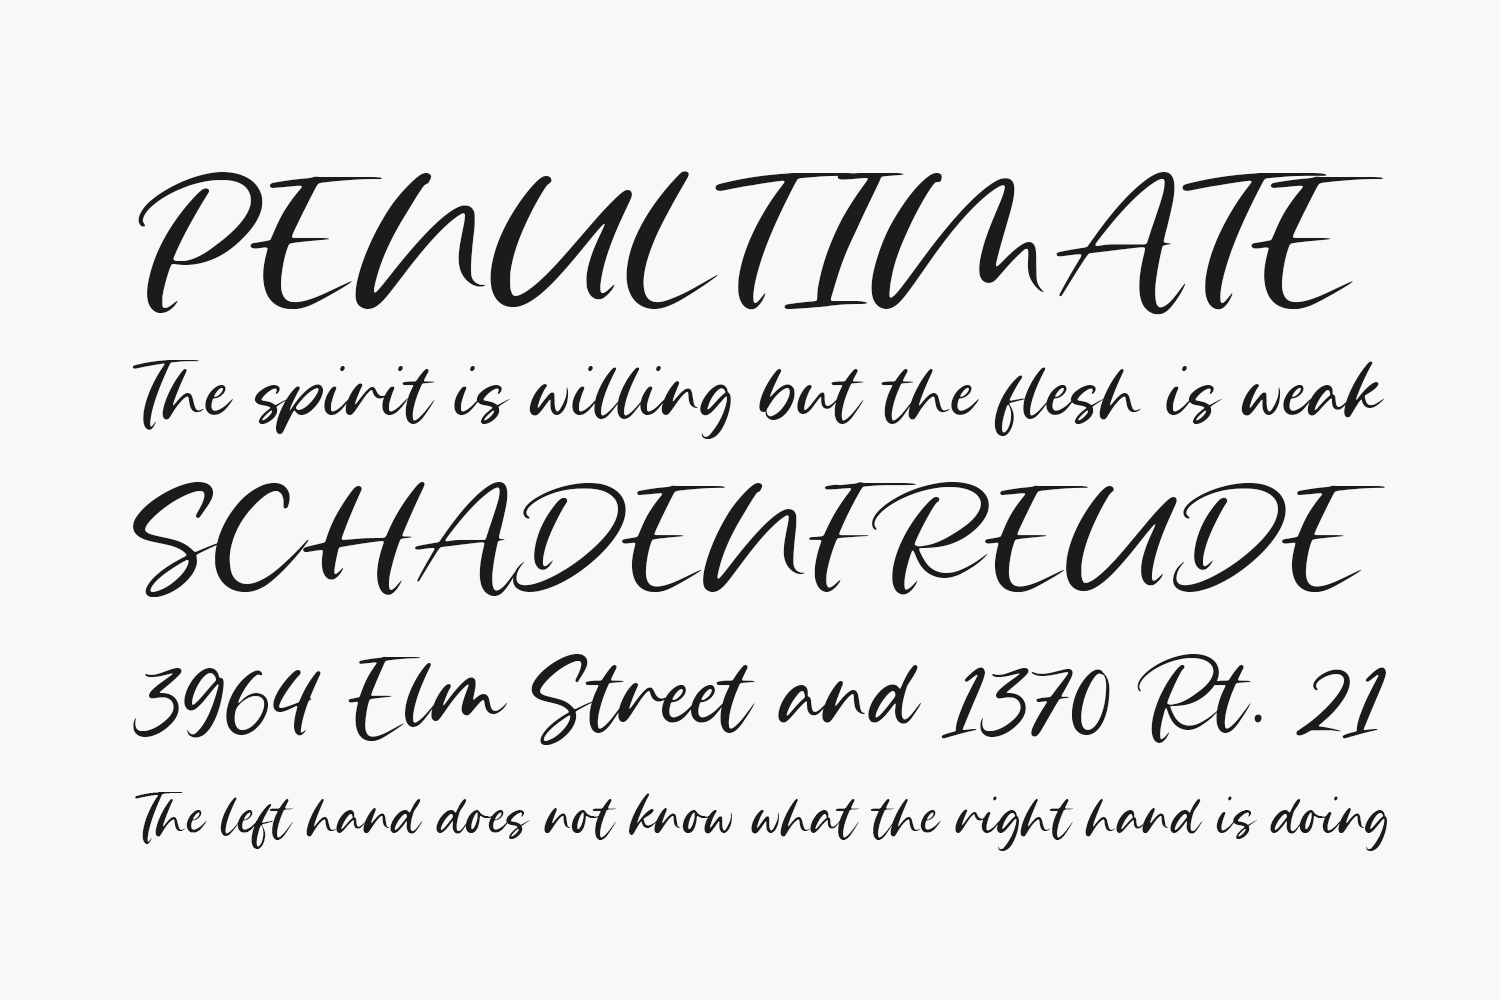 inherit font family free download